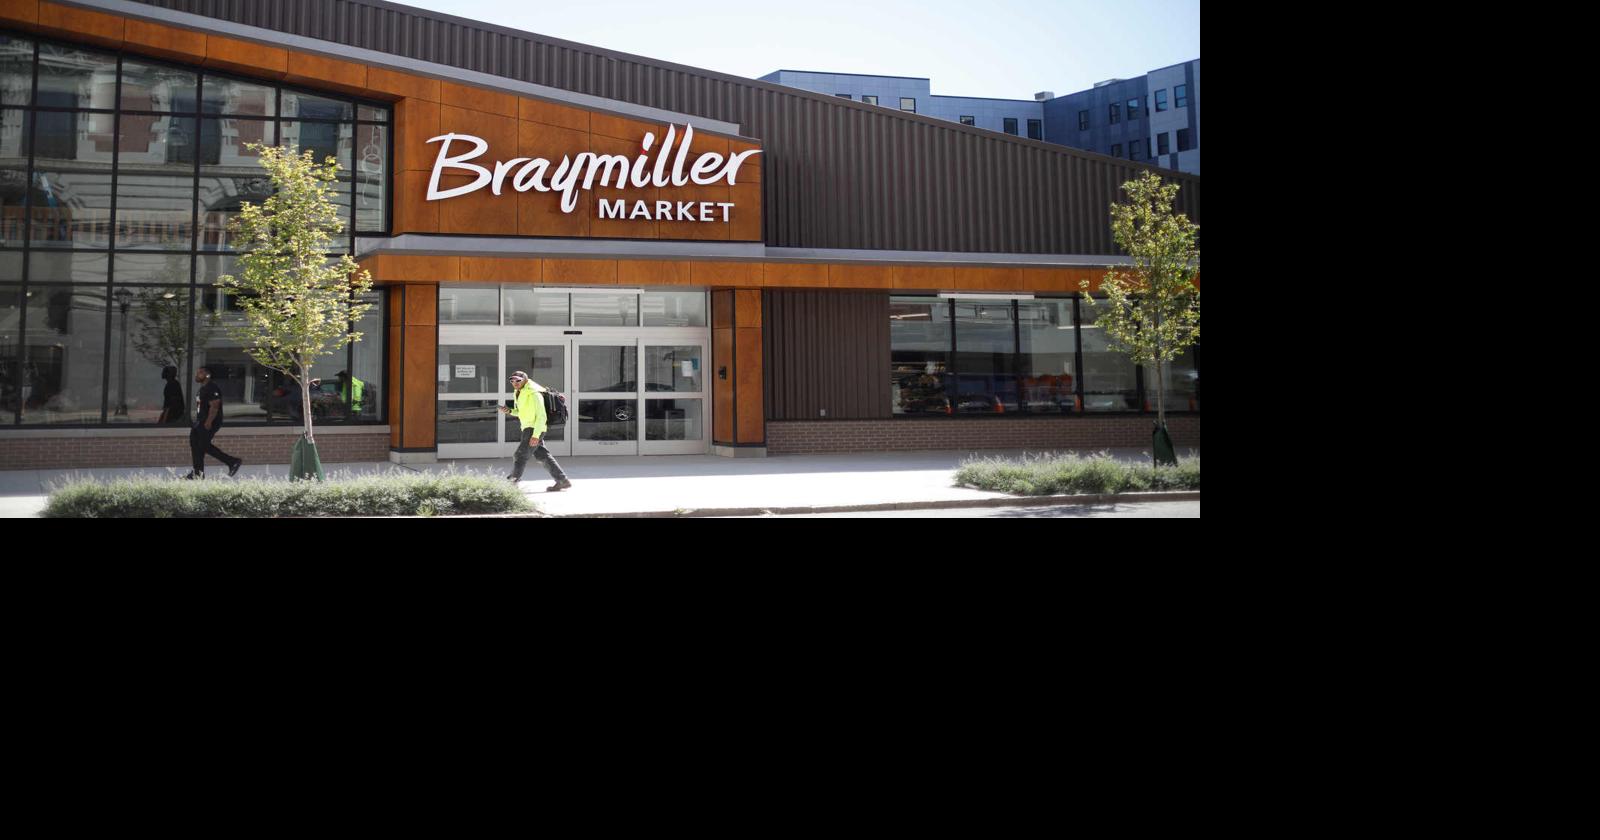 Braymiller needs to show City Hall a persuasive business plan